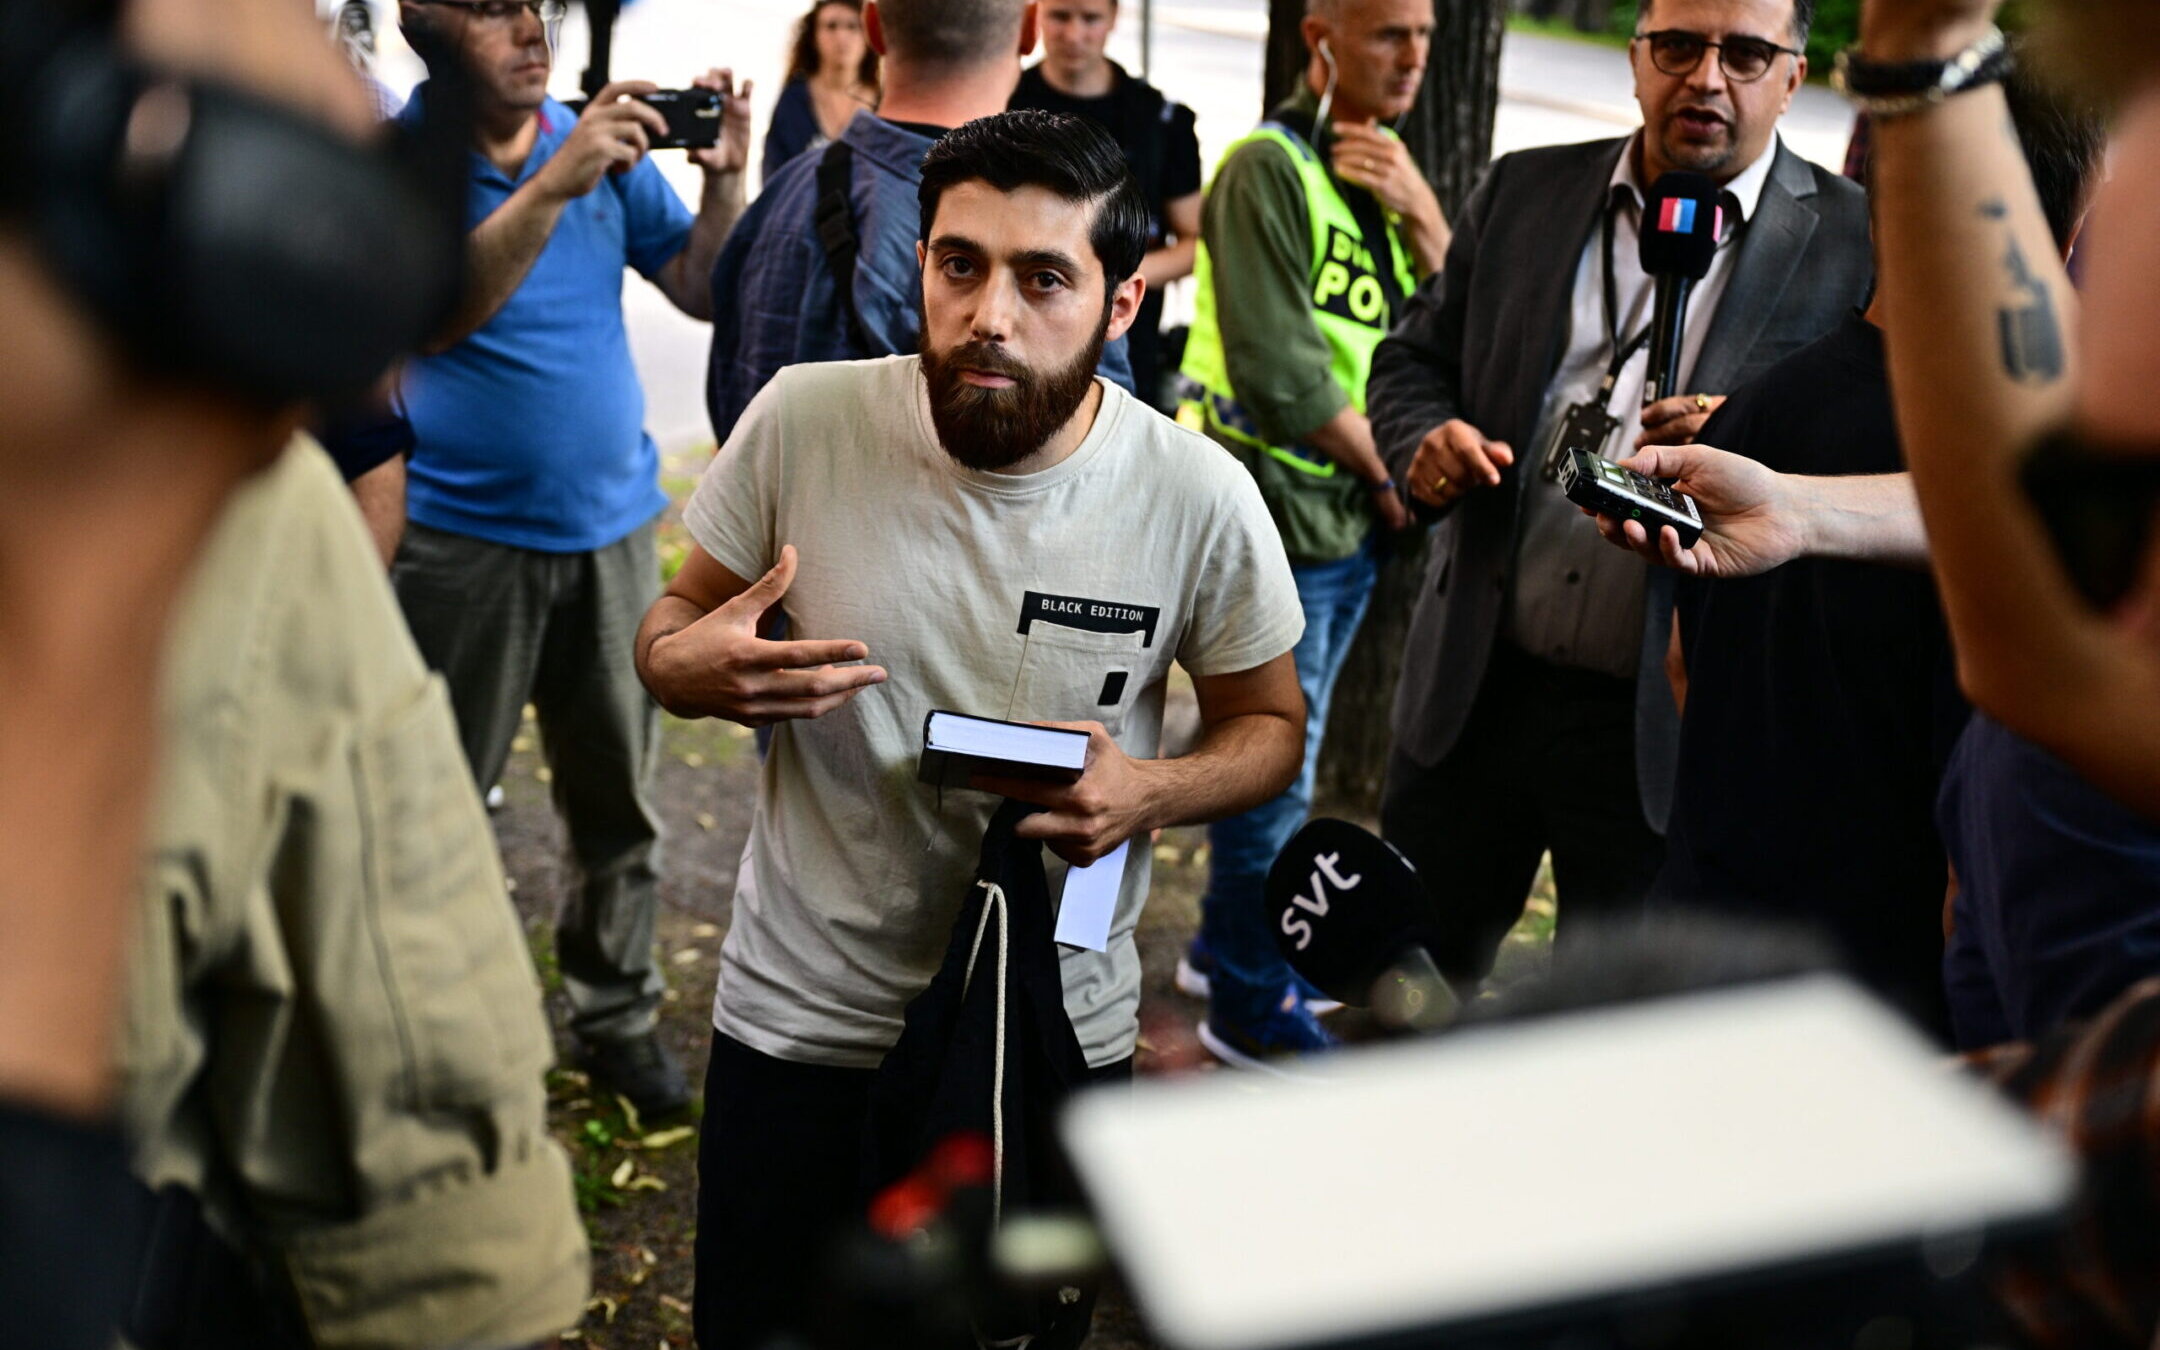 Ahmad Alush, who had been given permission by the police for a public gathering to burn a Jewish and Christian Bible outside the Israeli embassy in Stockholm, is surrounded by journalists, July 15, 2023. (Magnus Lejhall/TT News Agency/AFP via Getty Images)